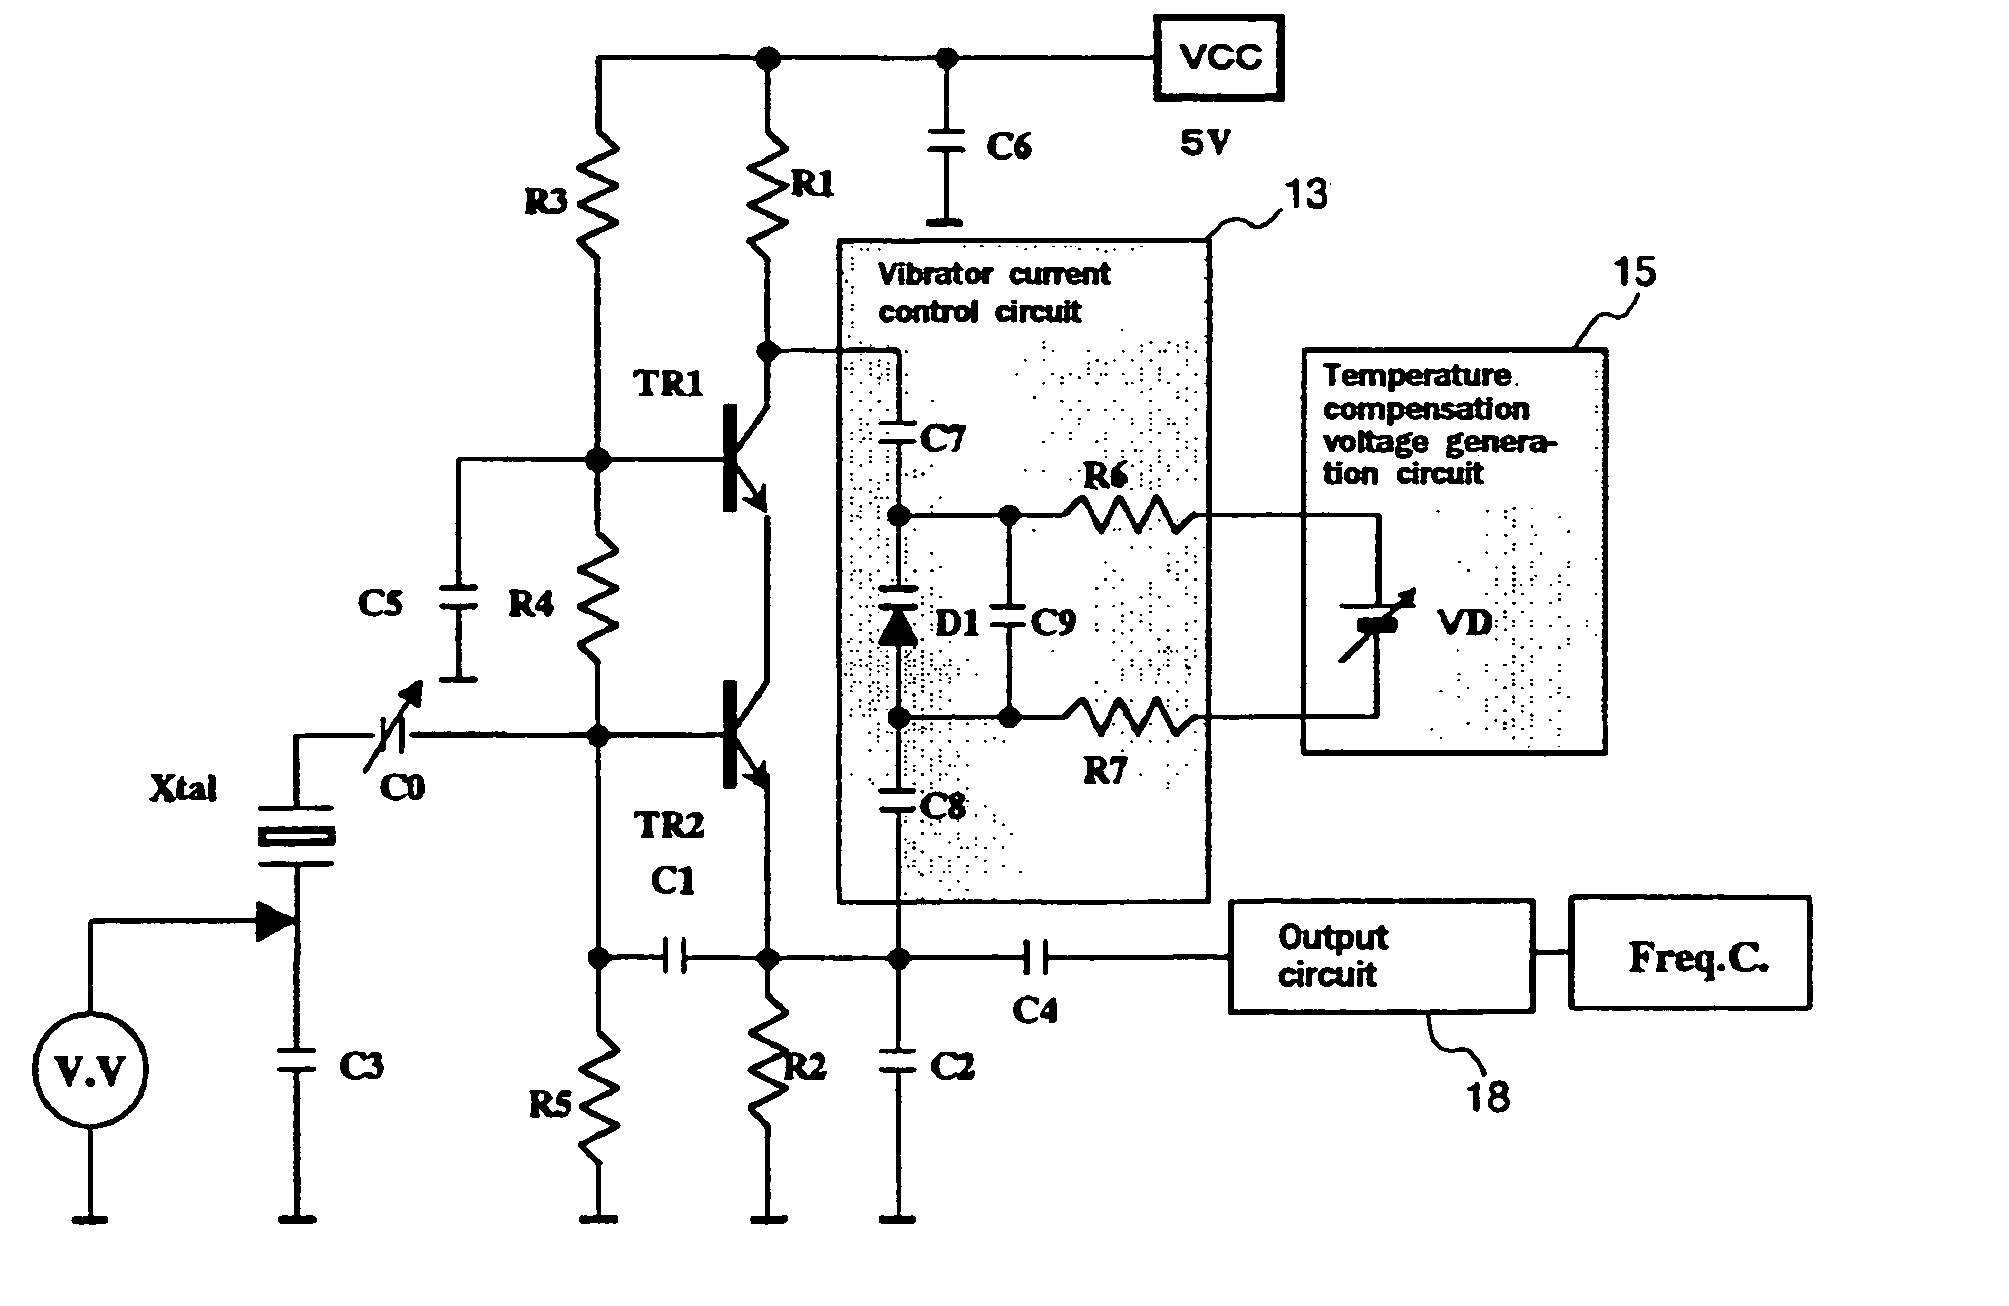 Crystal oscillator with temperature compensated through a vibrator current control circuit